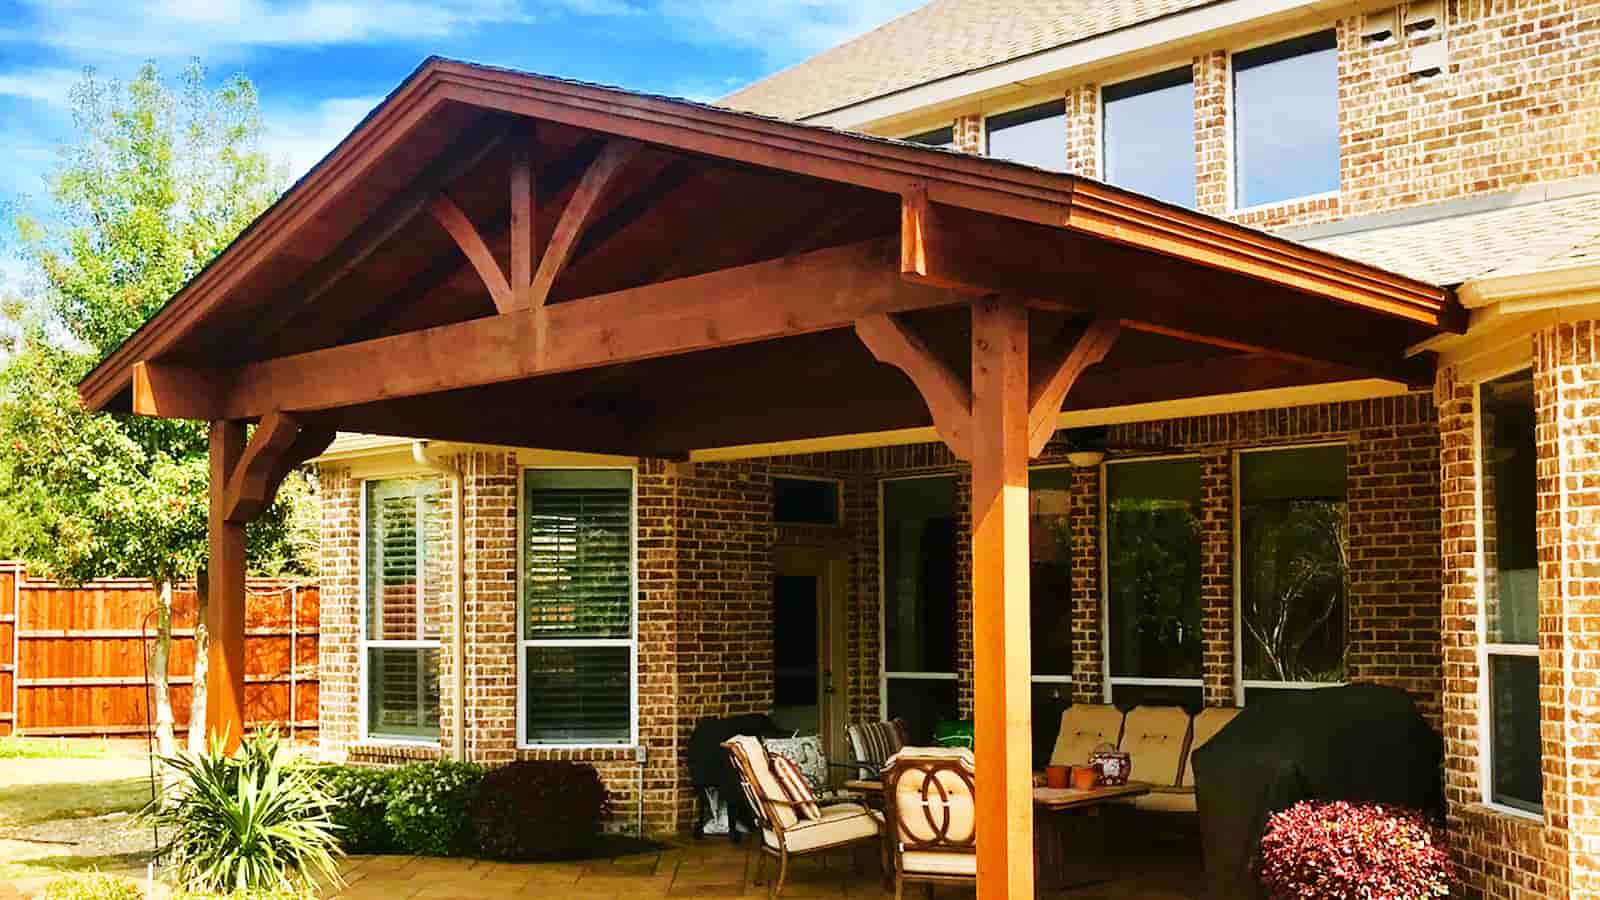 Patio Pergola Covers Cost, What Is The Cost Of A Covered Patio